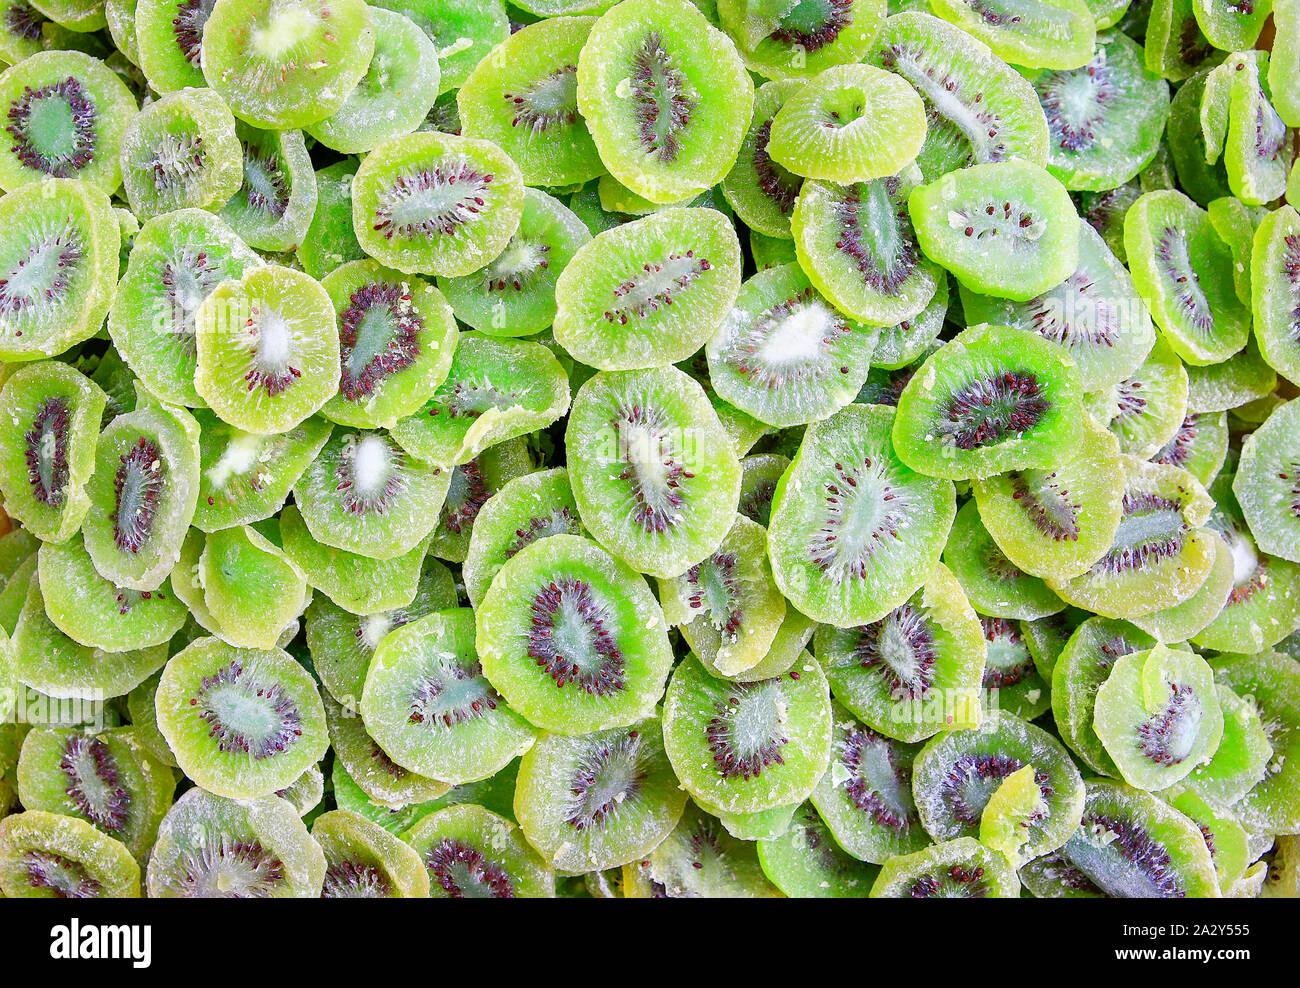 Heap of dry green kiwi slices for sale at market Stock Photo